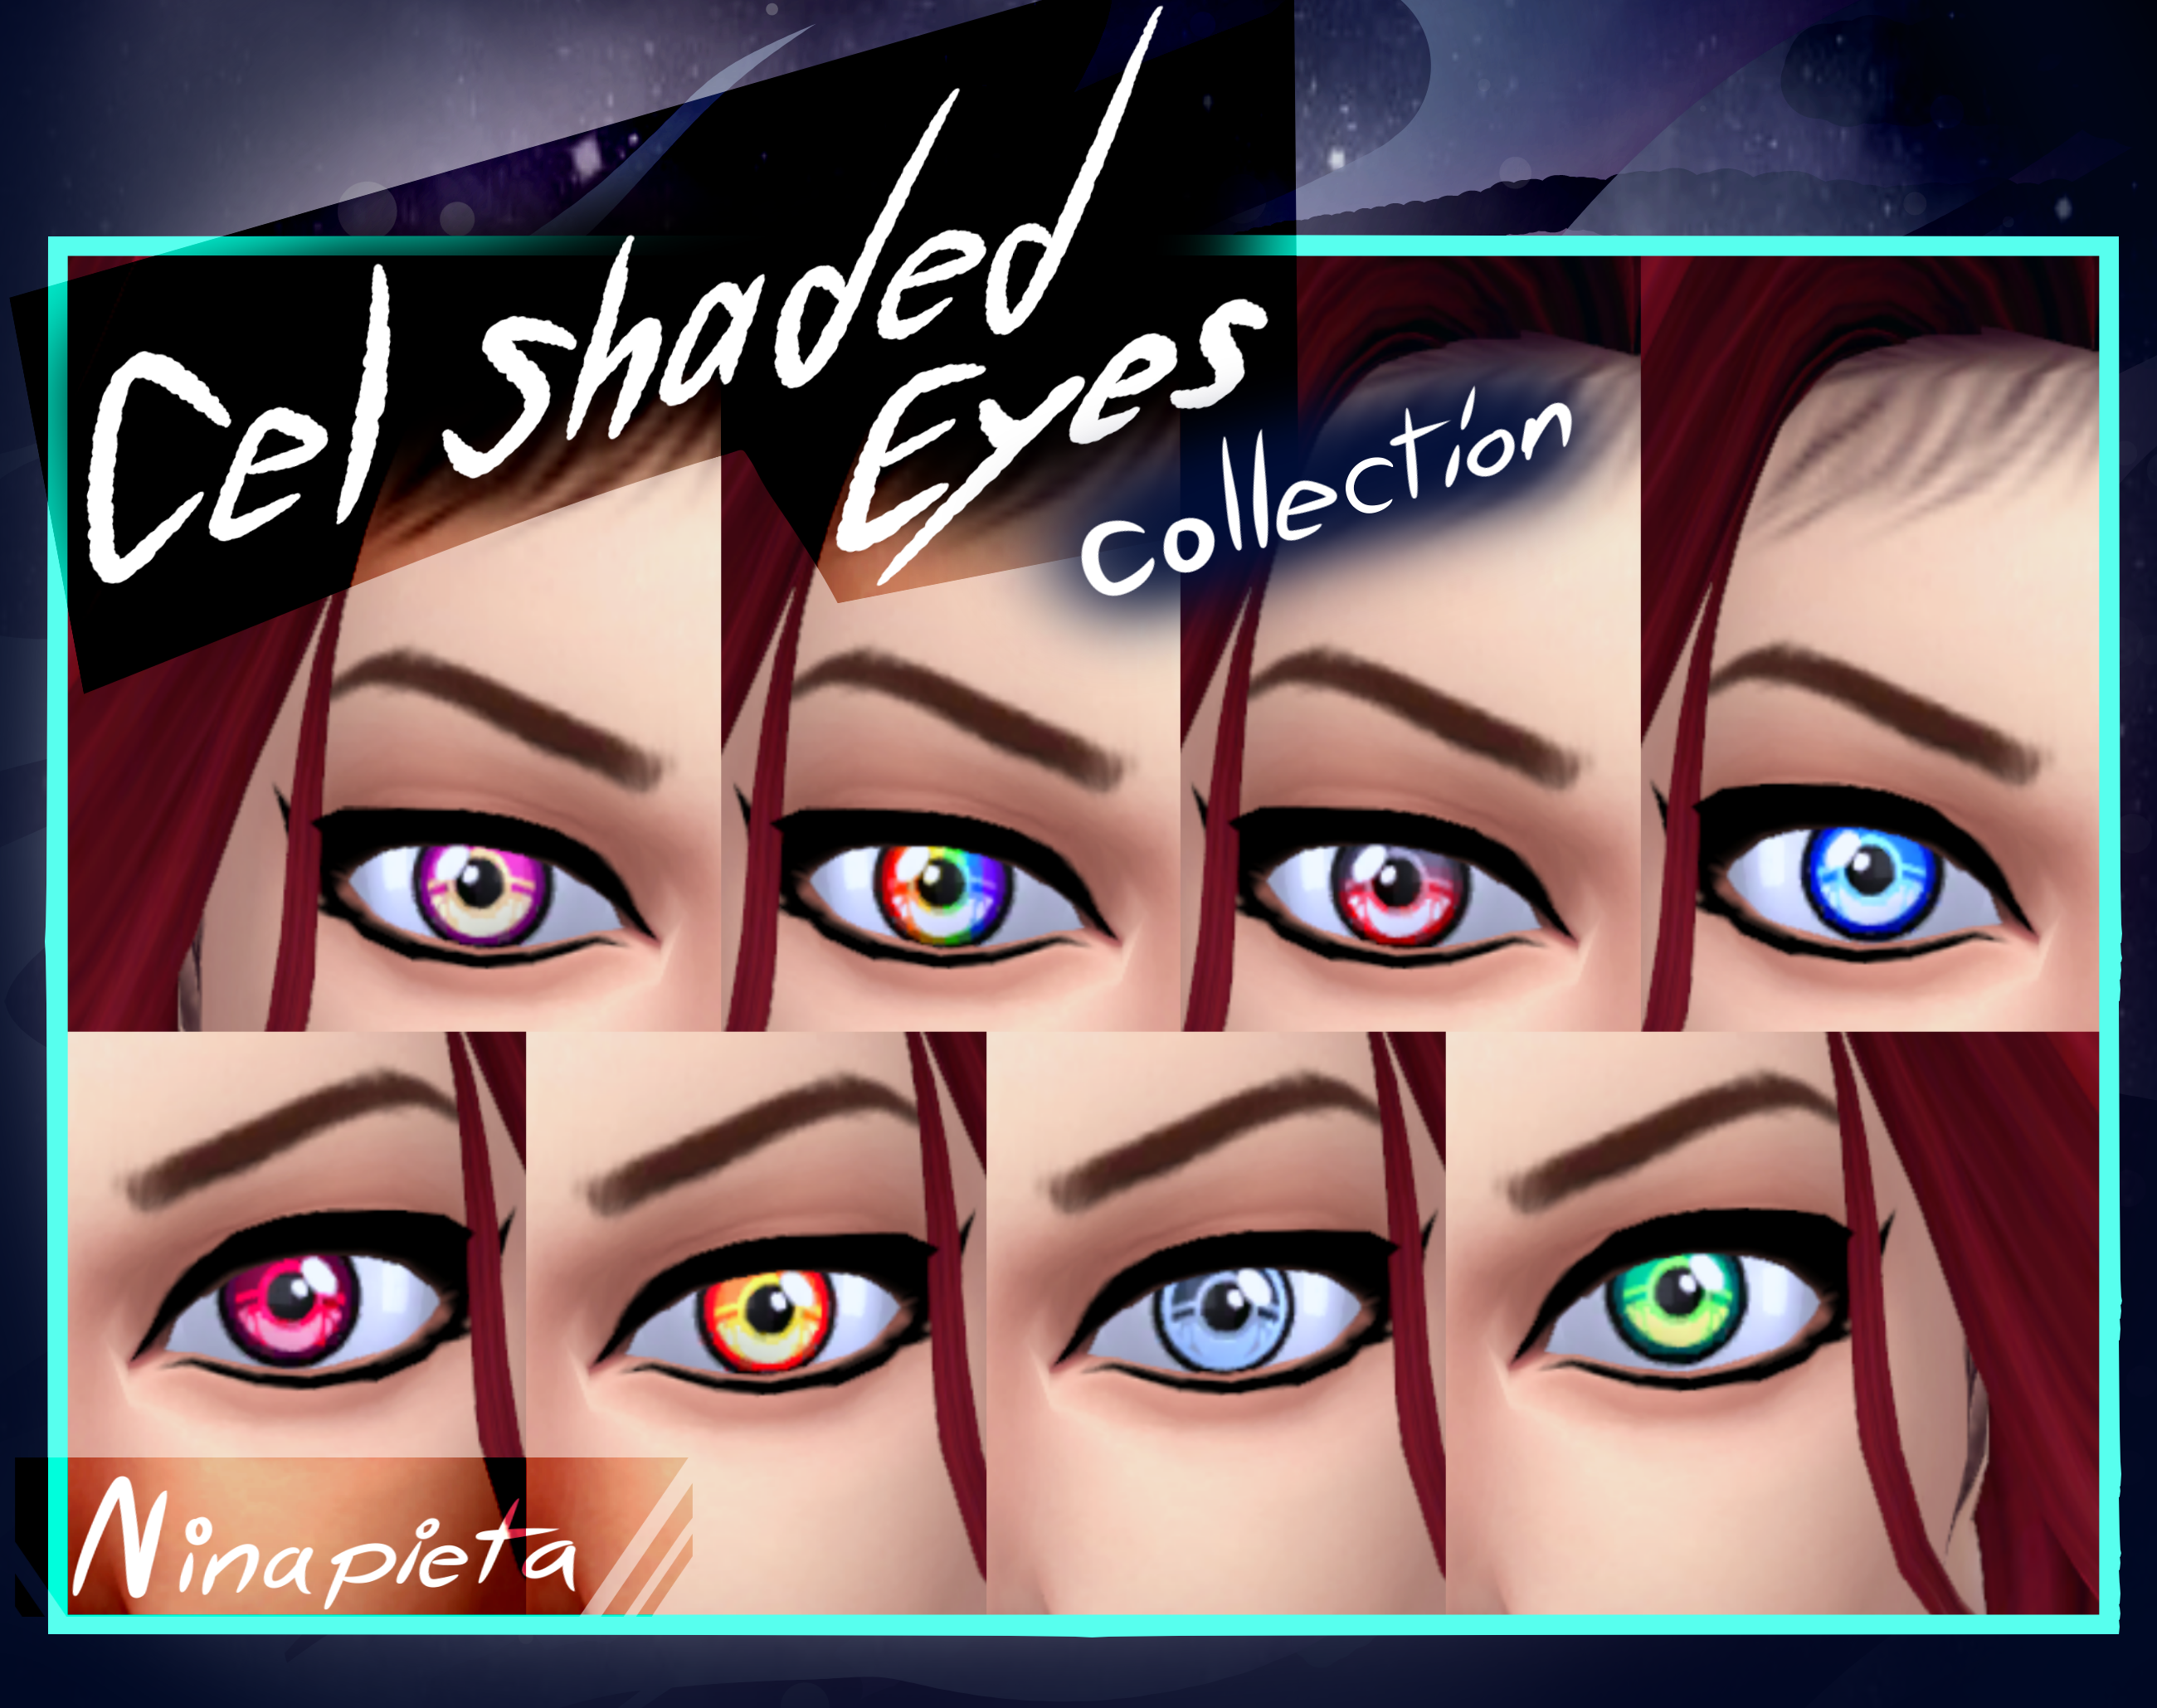 MTS_Ninapieta-1947530-TheSims4-CelShadedEyesCollection.png